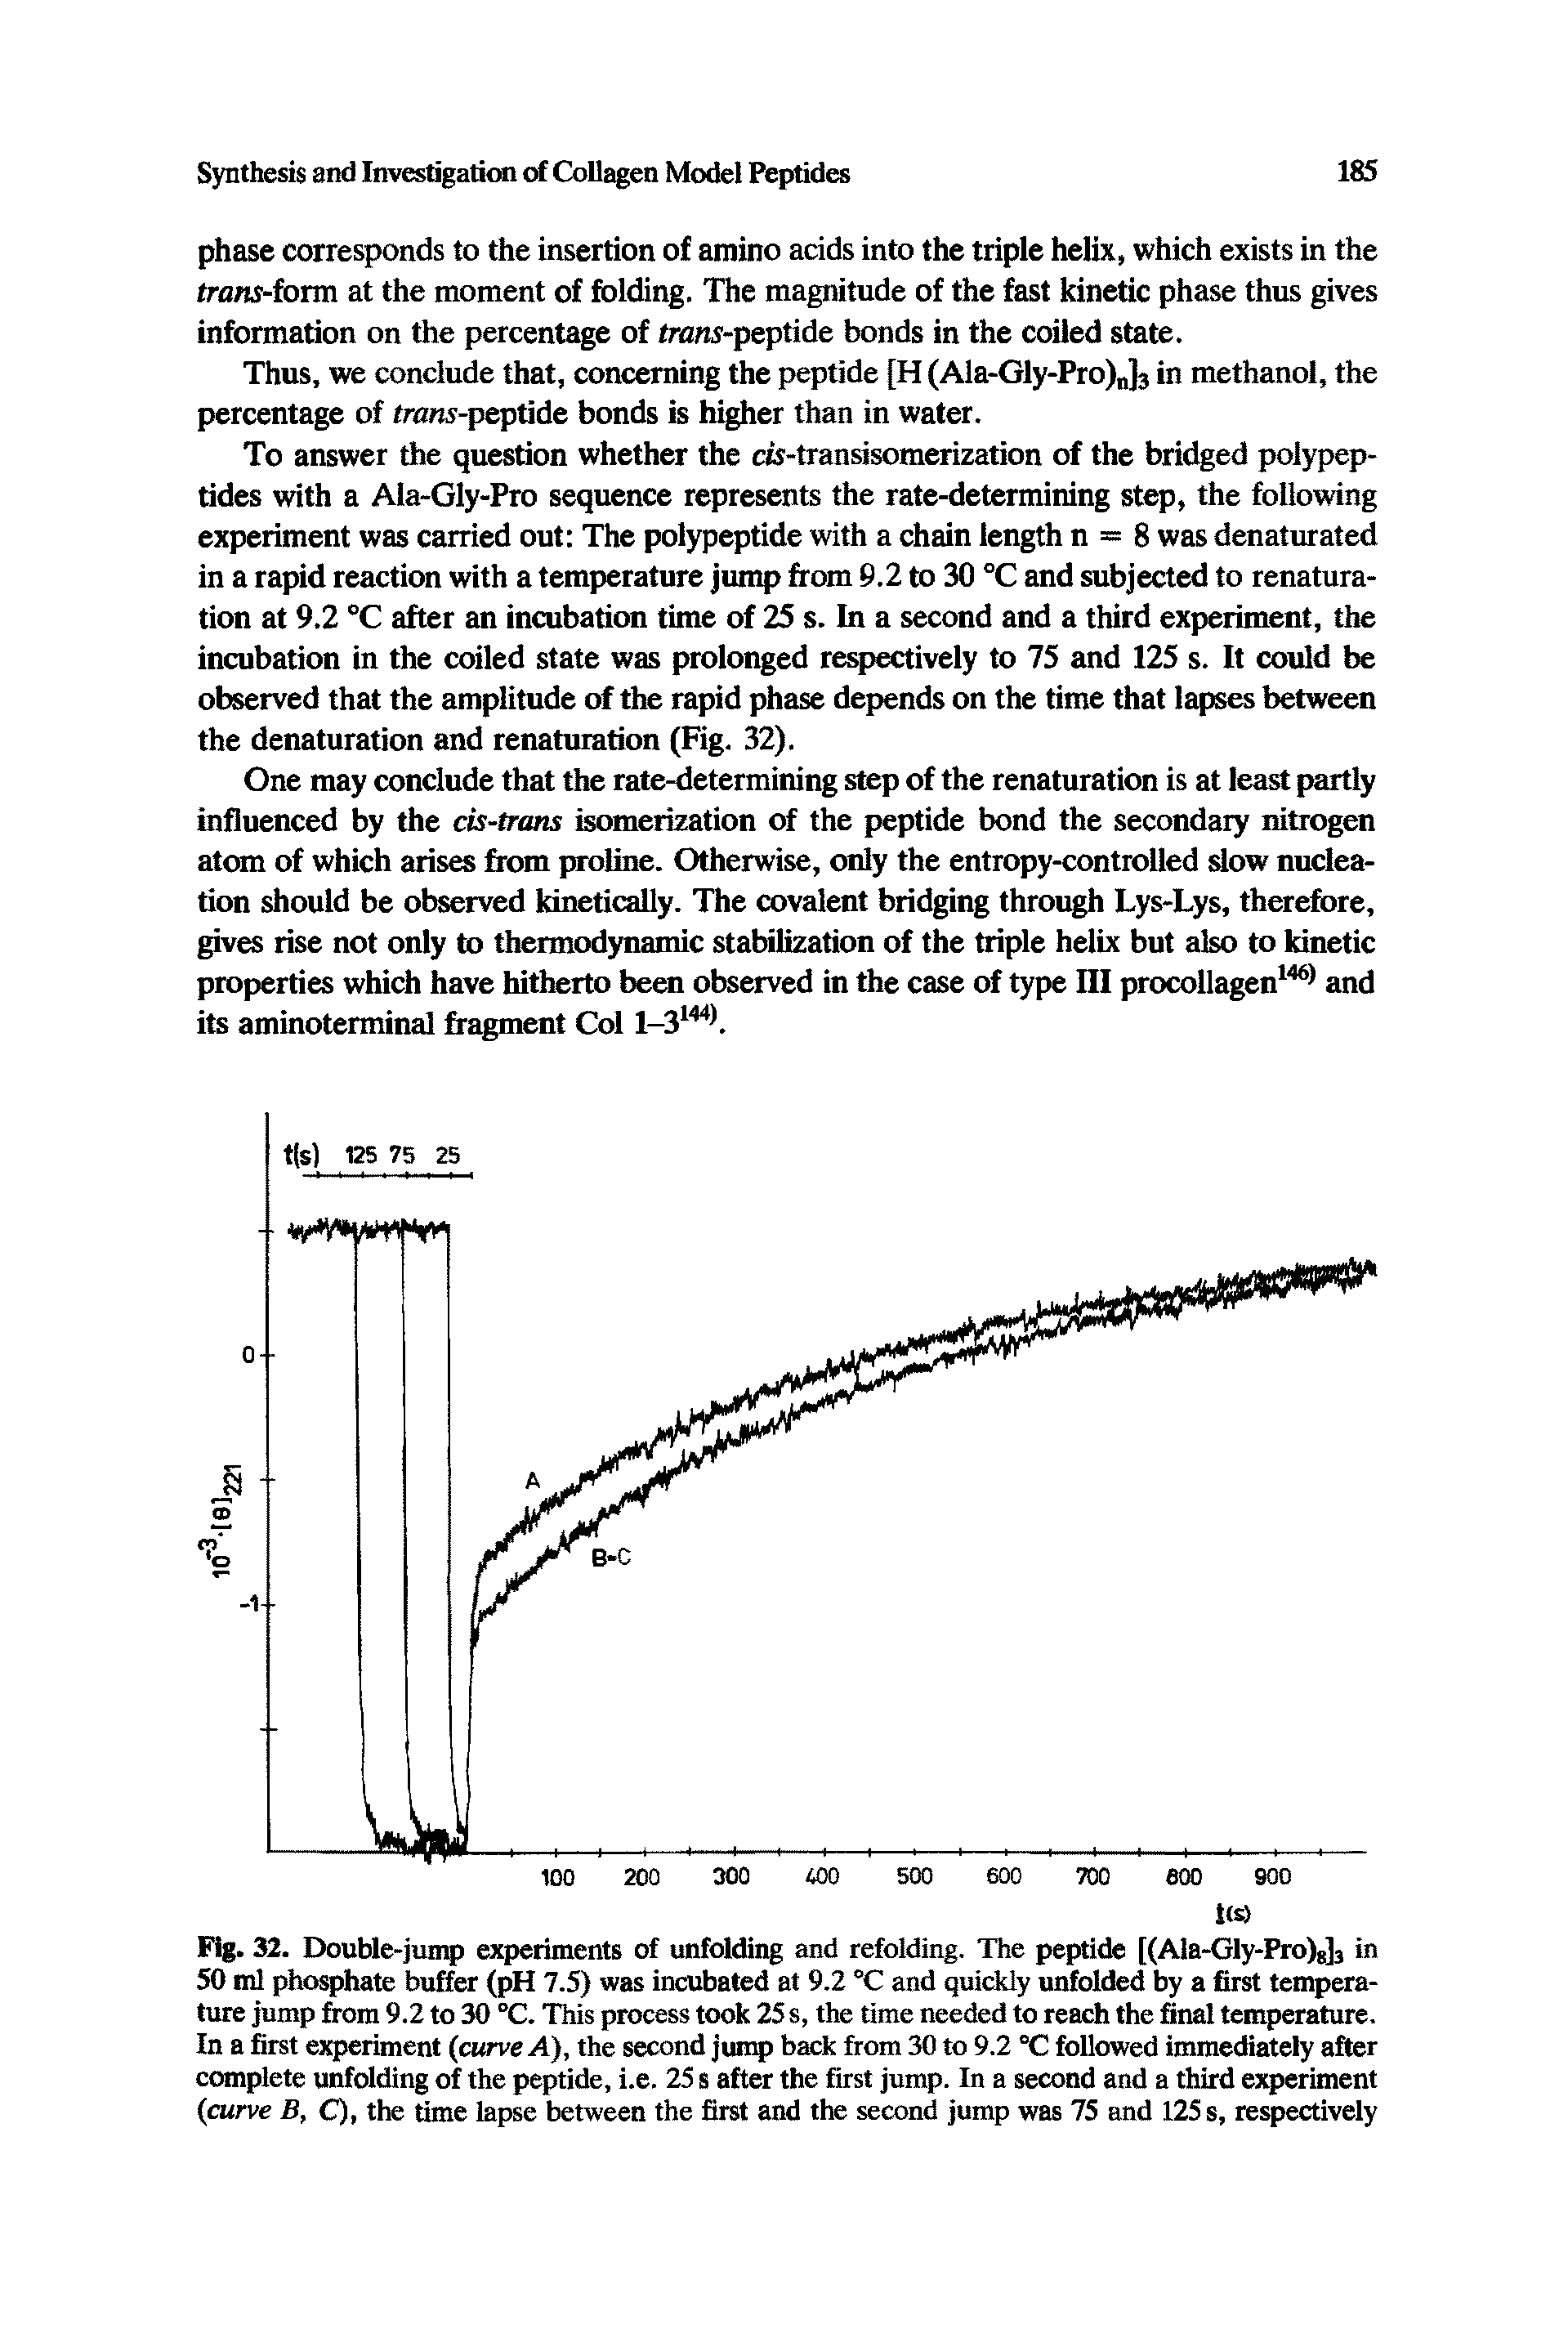 Fig. 32. Double-jump experiments of unfolding and refolding. The peptide [(Ala-Gly-Pro)s]3 in 50 ml phosphate buffer (pH 7.5) was incubated at 9.2 °C and quickly unfolded by a first temperature jump from 9.2 to 30 °C. This process took 25 s, the time needed to reach the final temperature. In a first experiment (curve A), the second jump back from 30 to 9.2 °C followed immediately after complete unfolding of the peptide, i.e. 25 s after the first jump. In a second and a third experiment (curve B, C), the time lapse between the first and the second jump was 75 and 125 s, respectively...